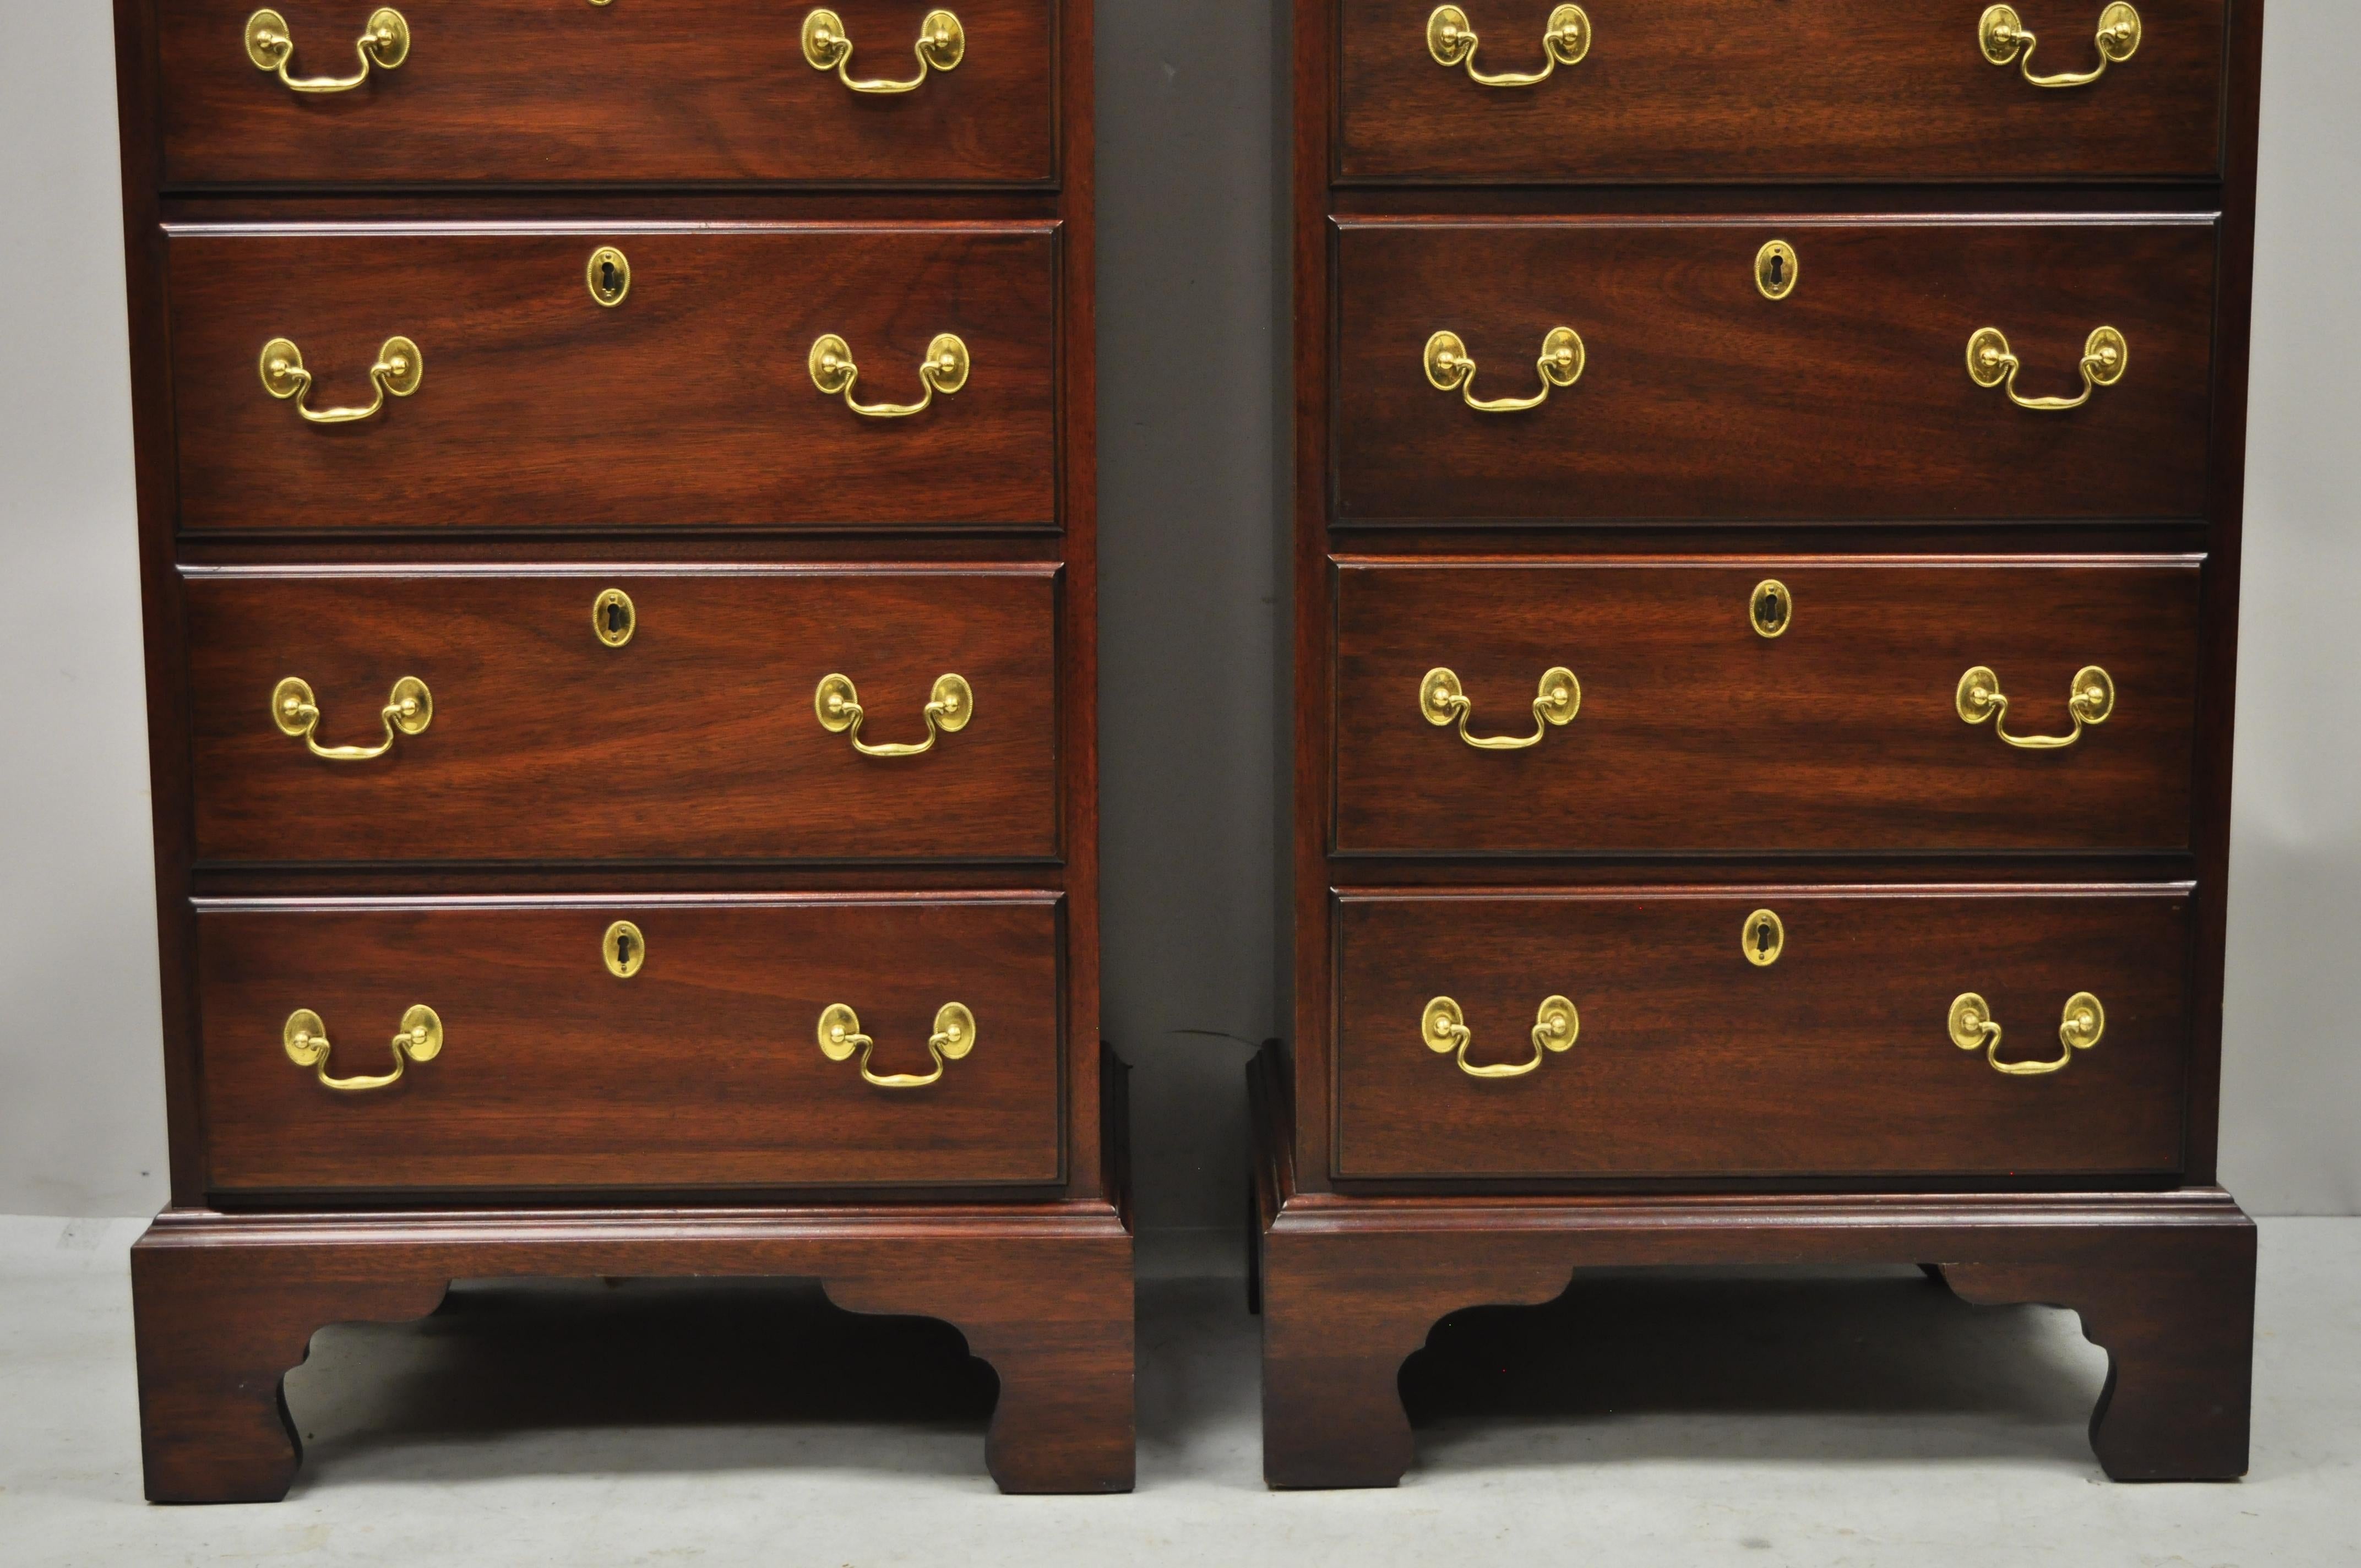 Henkel Harris Chippendale Solid Mahogany 7 Drawer lingerie tall chest - a Pair. Item features solid wood construction, beautiful wood grain, original label, 7 dovetailed drawers, solid brass hardware, quality American craftsmanship, great style and